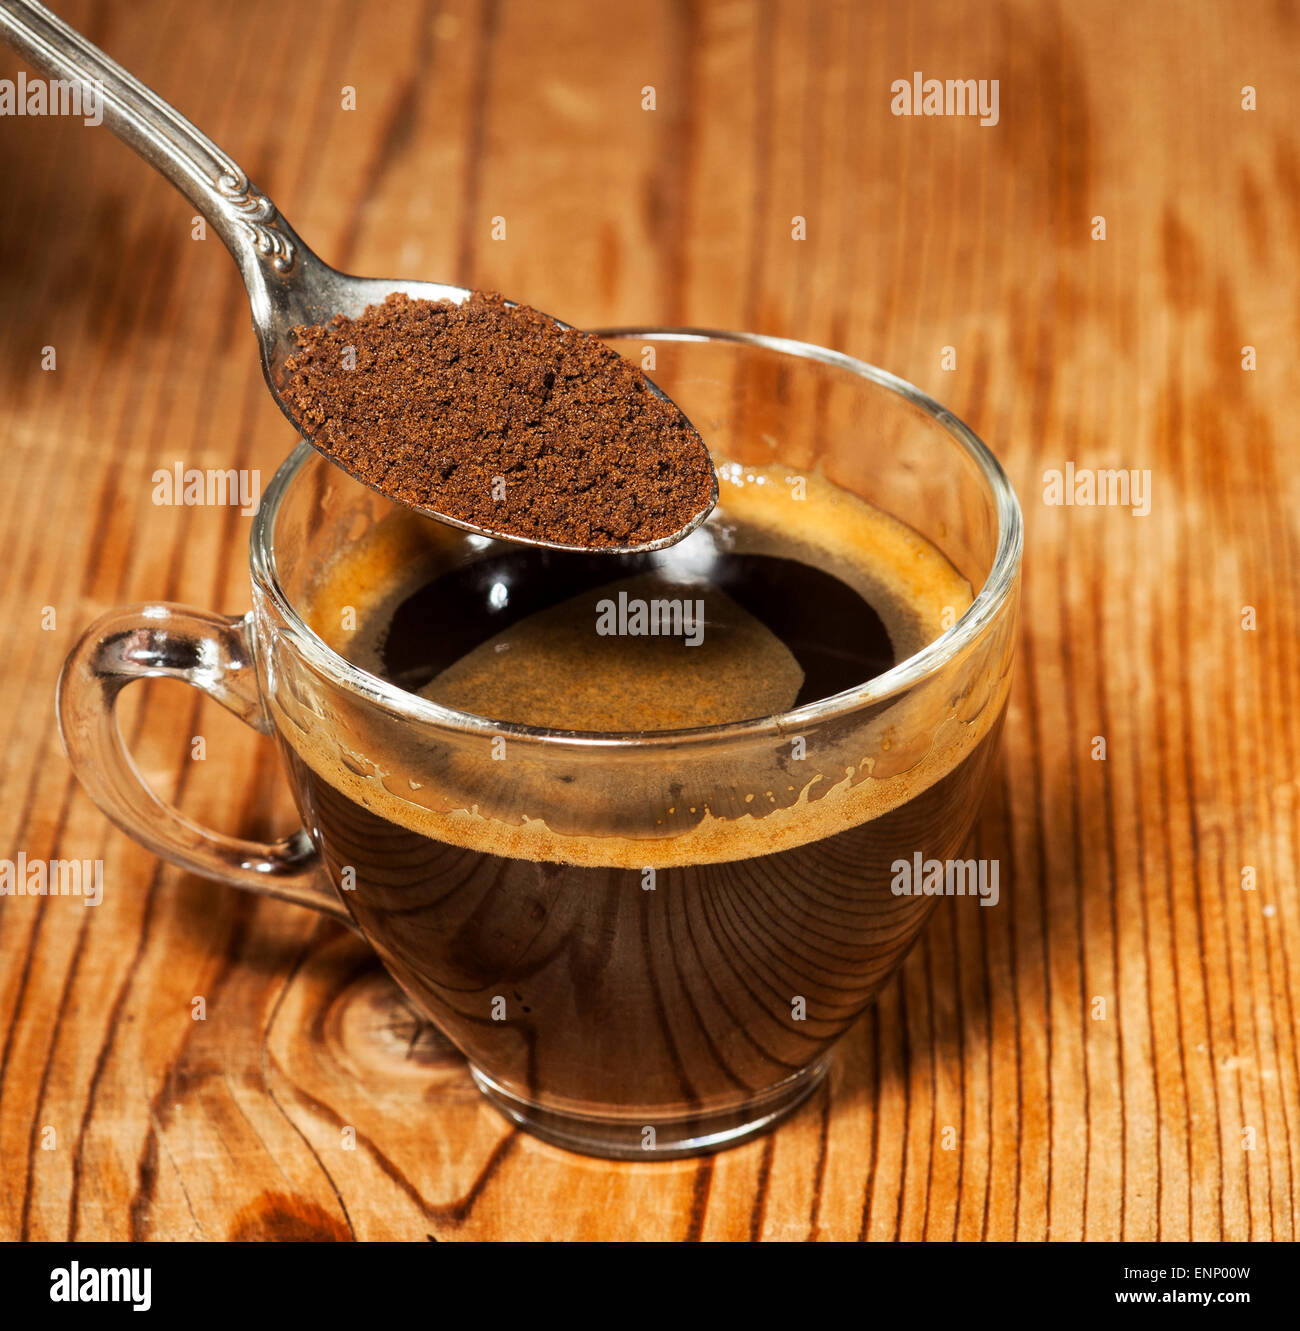 LONDON, UK - AUGUST 15, 2019: Pack of Nescafe Gold Cappuccino with coffee  beans and sugar cubes on light background Stock Photo - Alamy